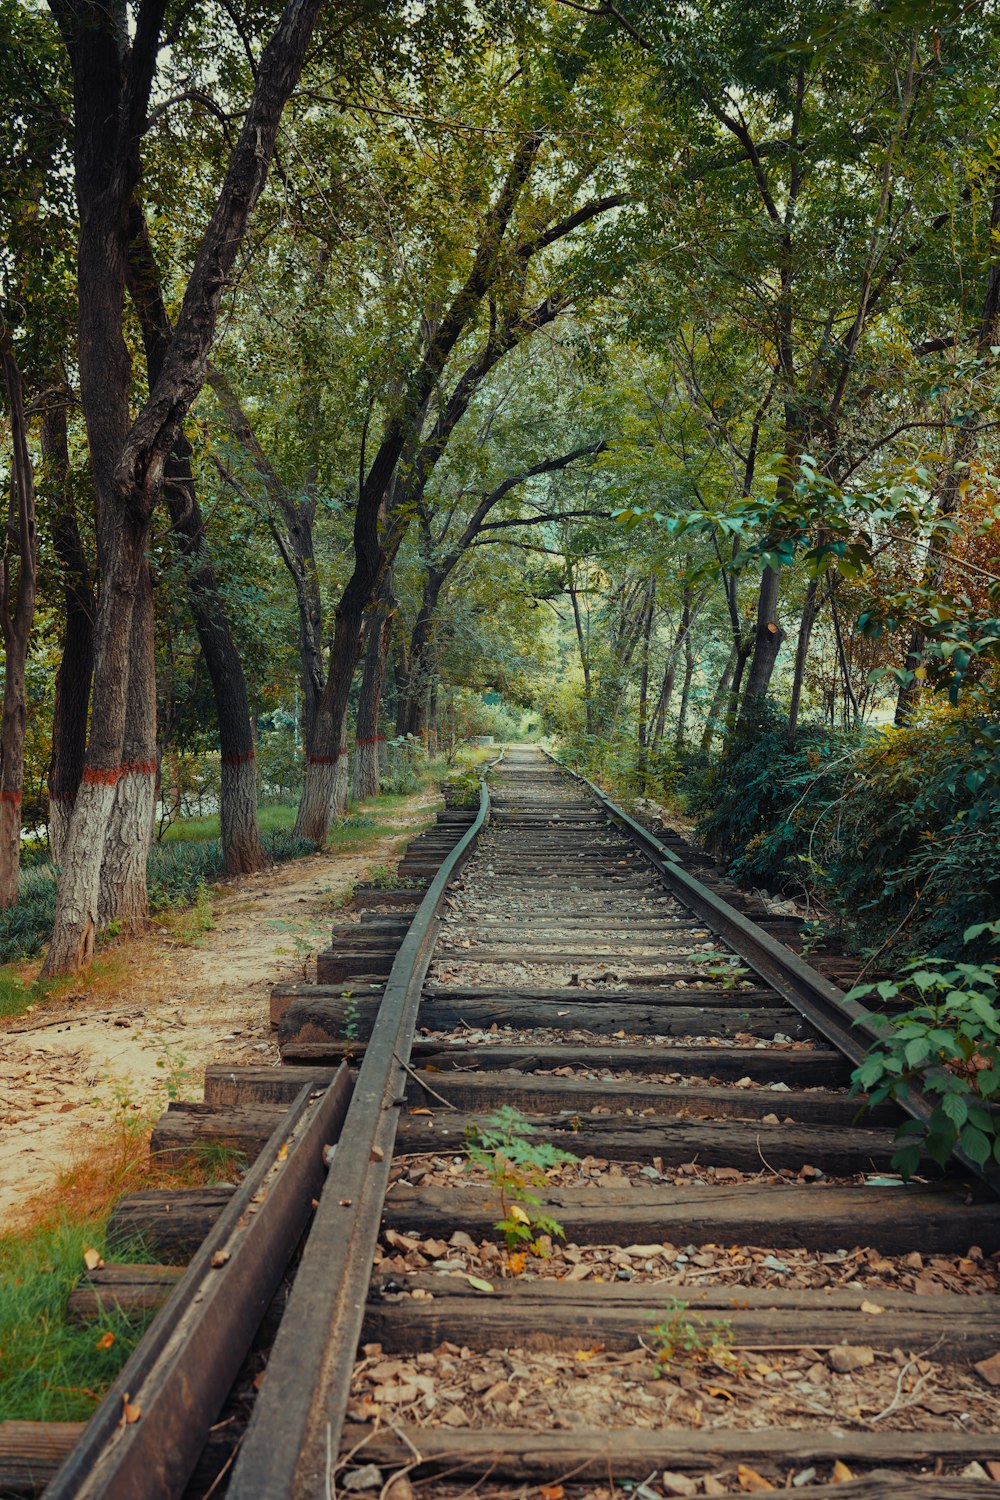 a train track running through a forest filled with trees